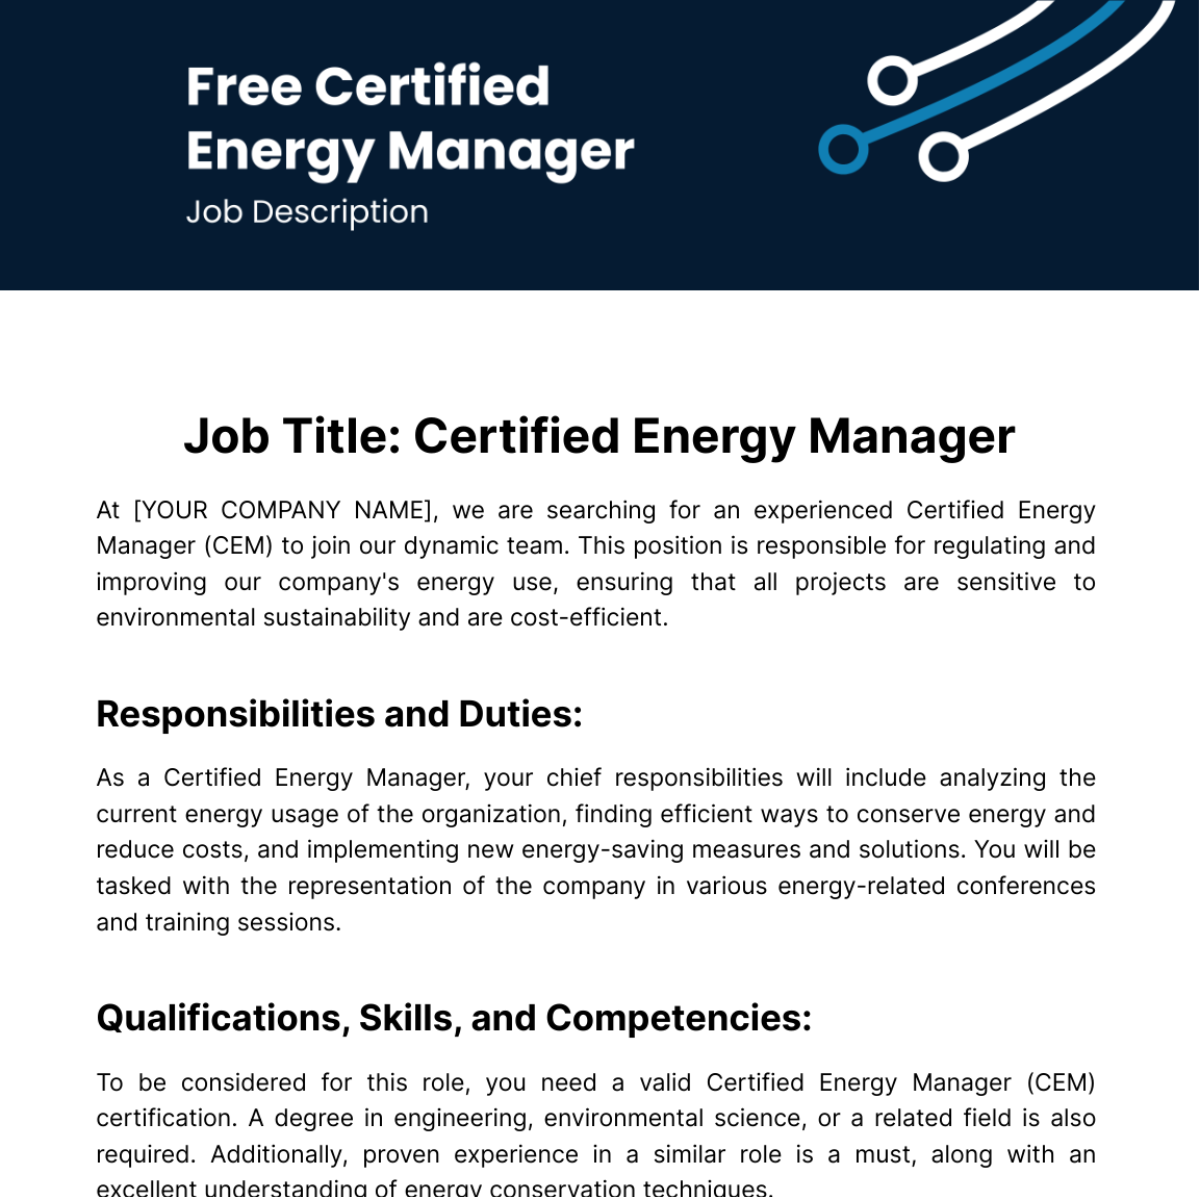 Free Certified Energy Manager Job Description Template